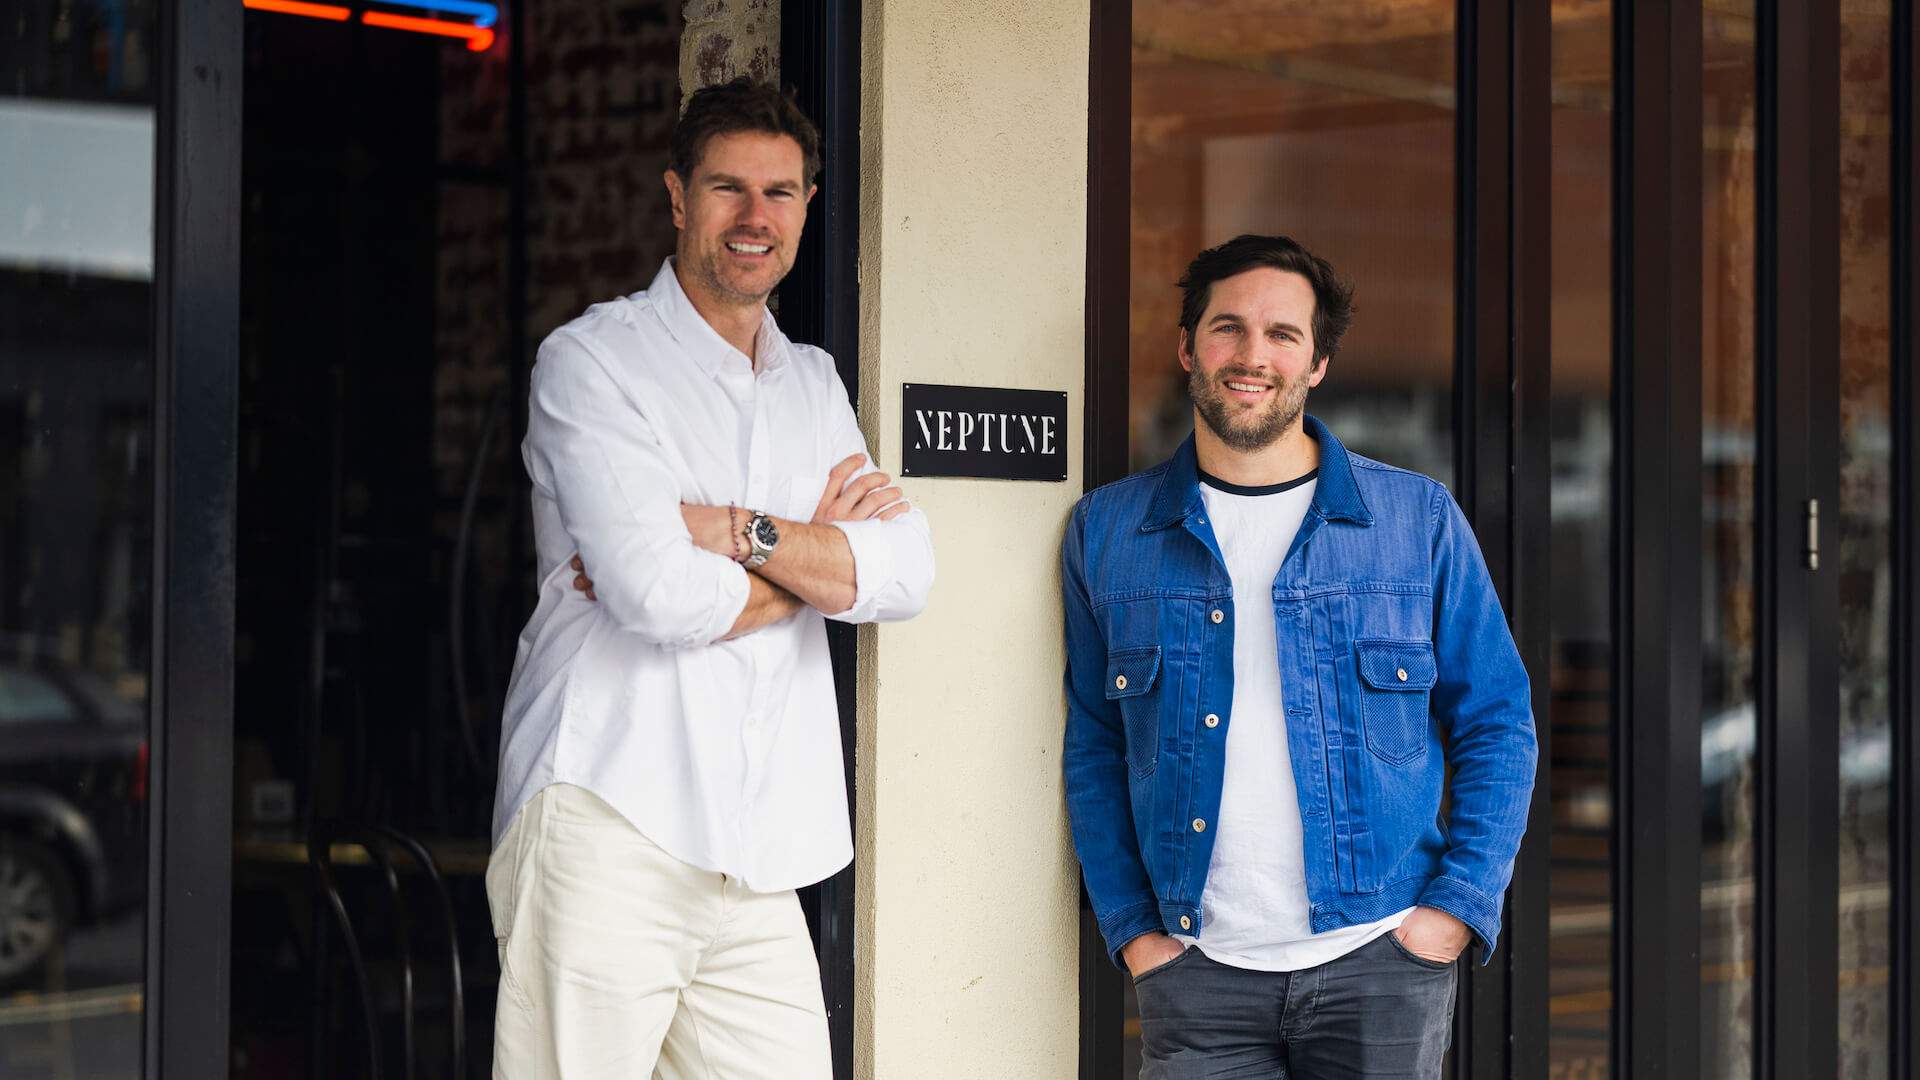 Nic Coulter and Michael Parker - owners of Neptune seafood restaurant in Melbourne